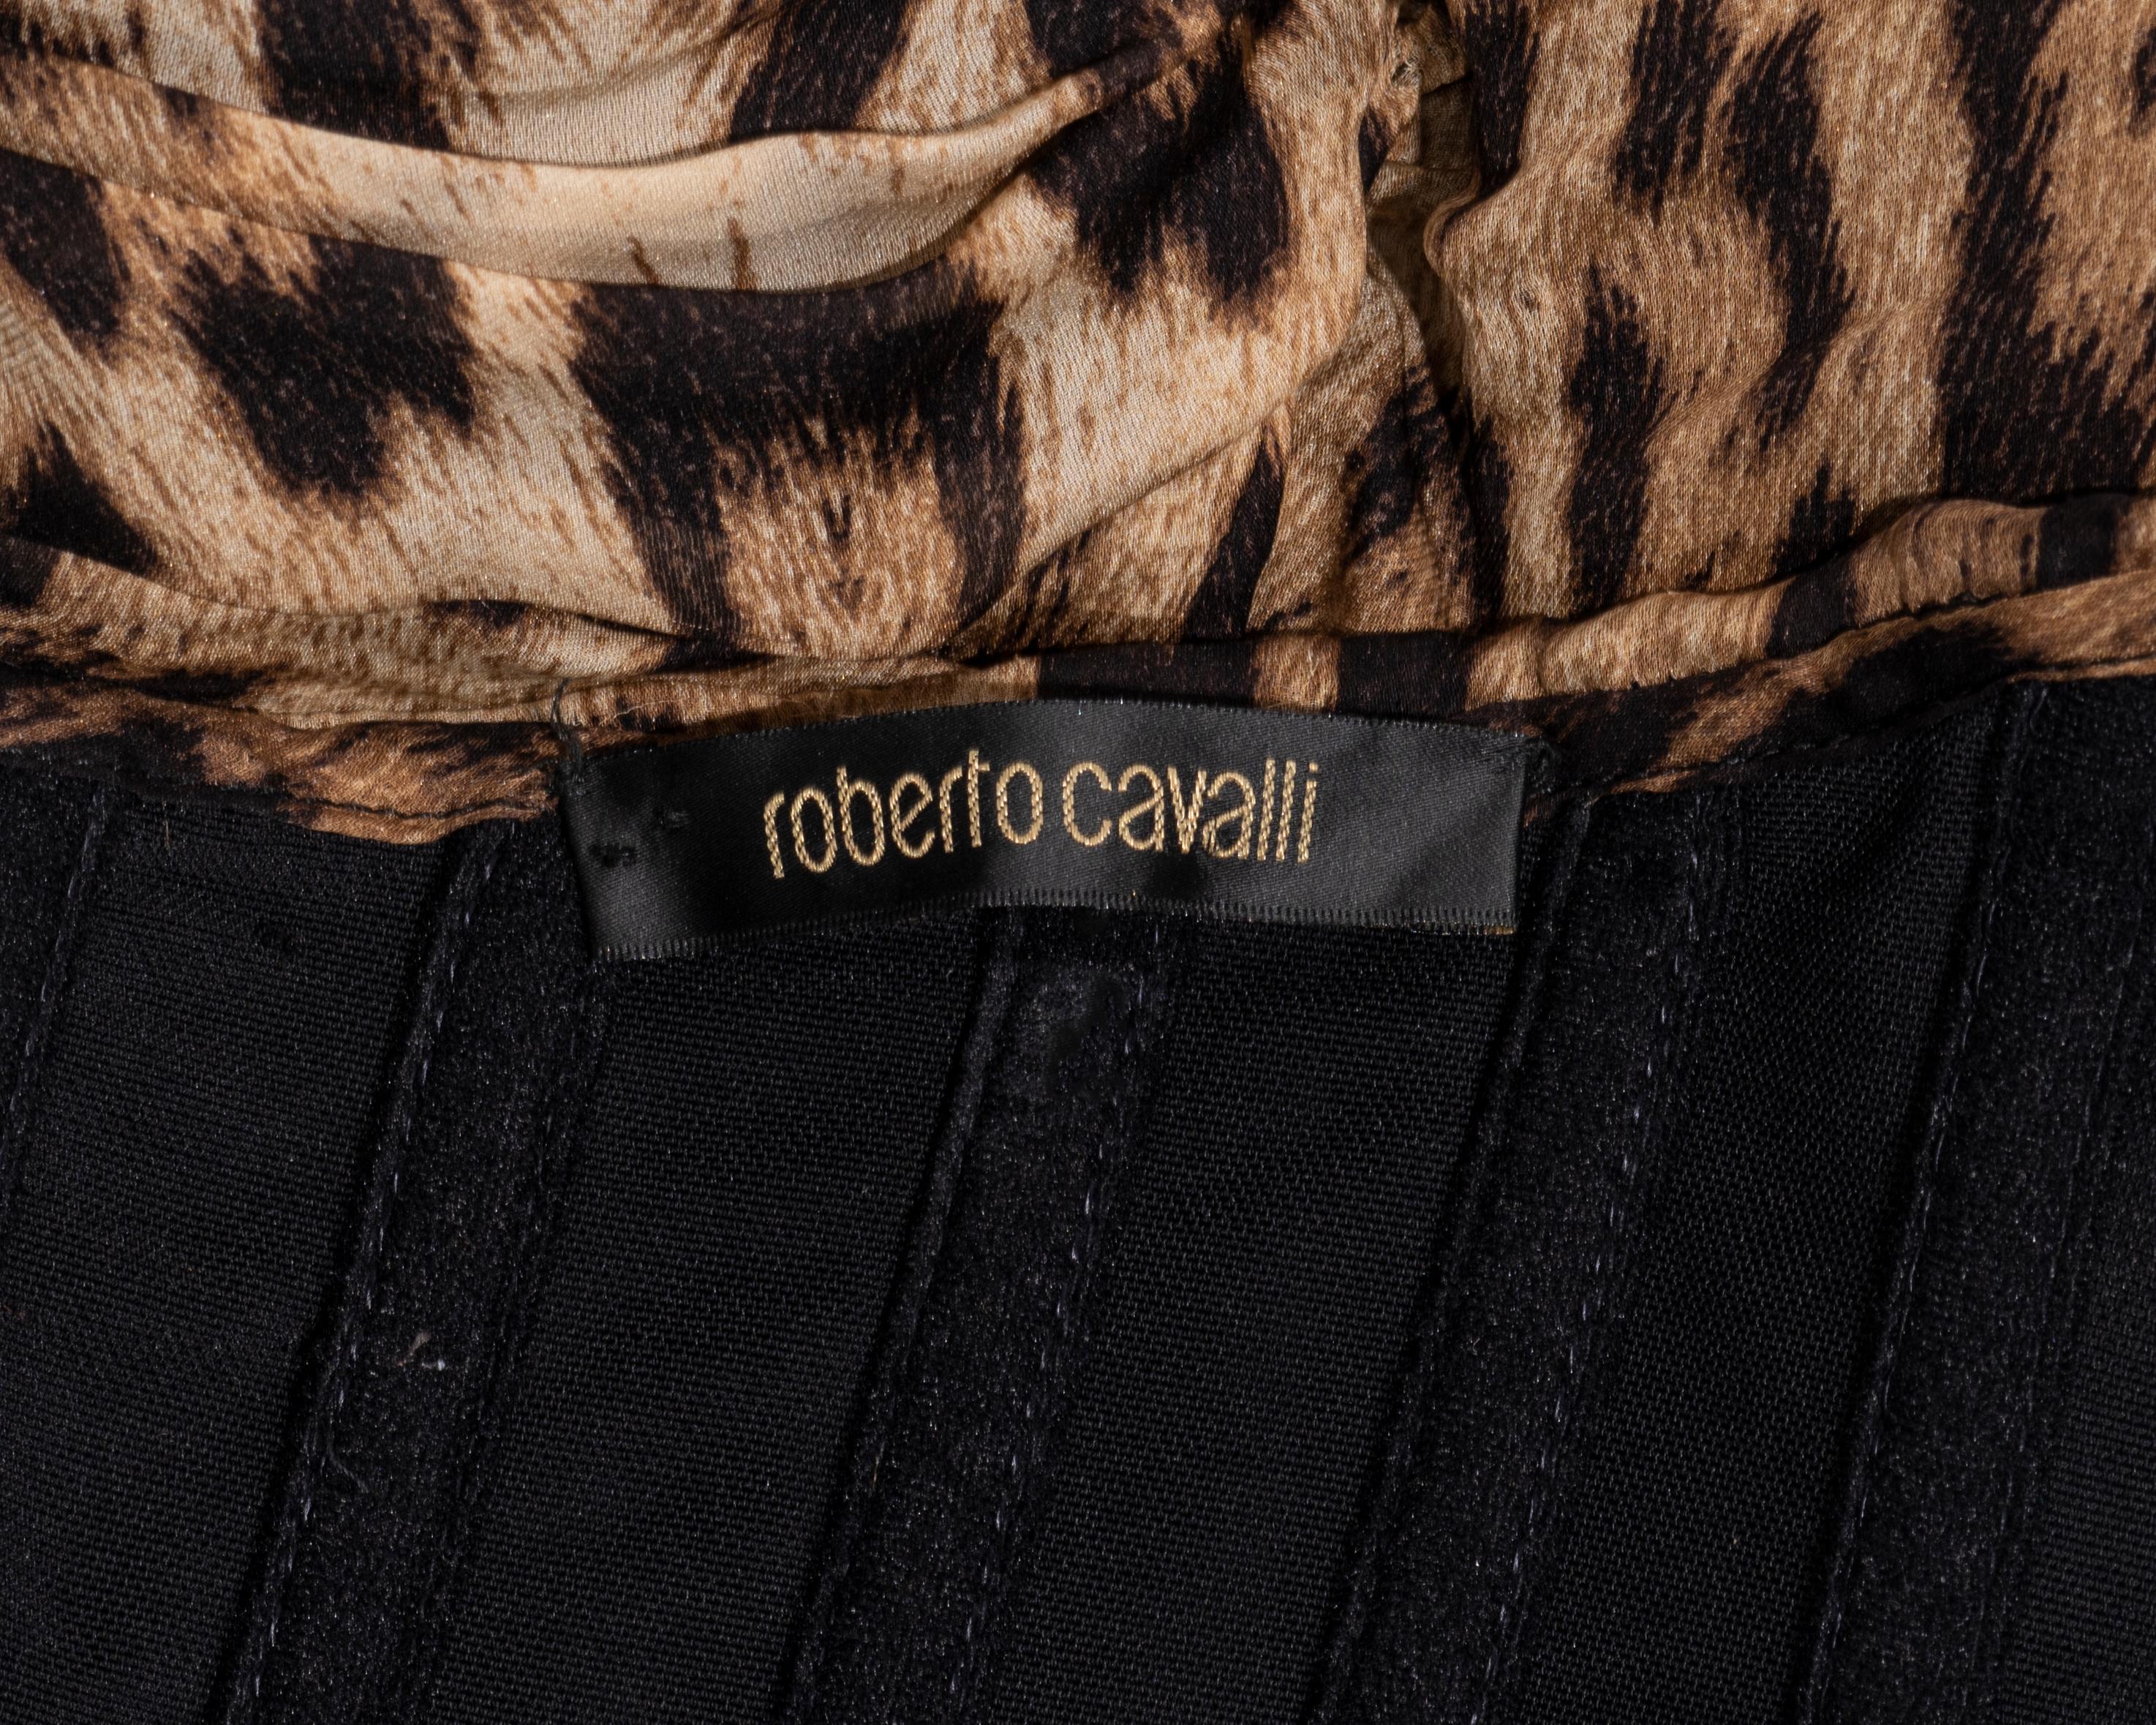 Roberto Cavalli leopard print silk evening dress with built-in corset, fw 2006 For Sale 5